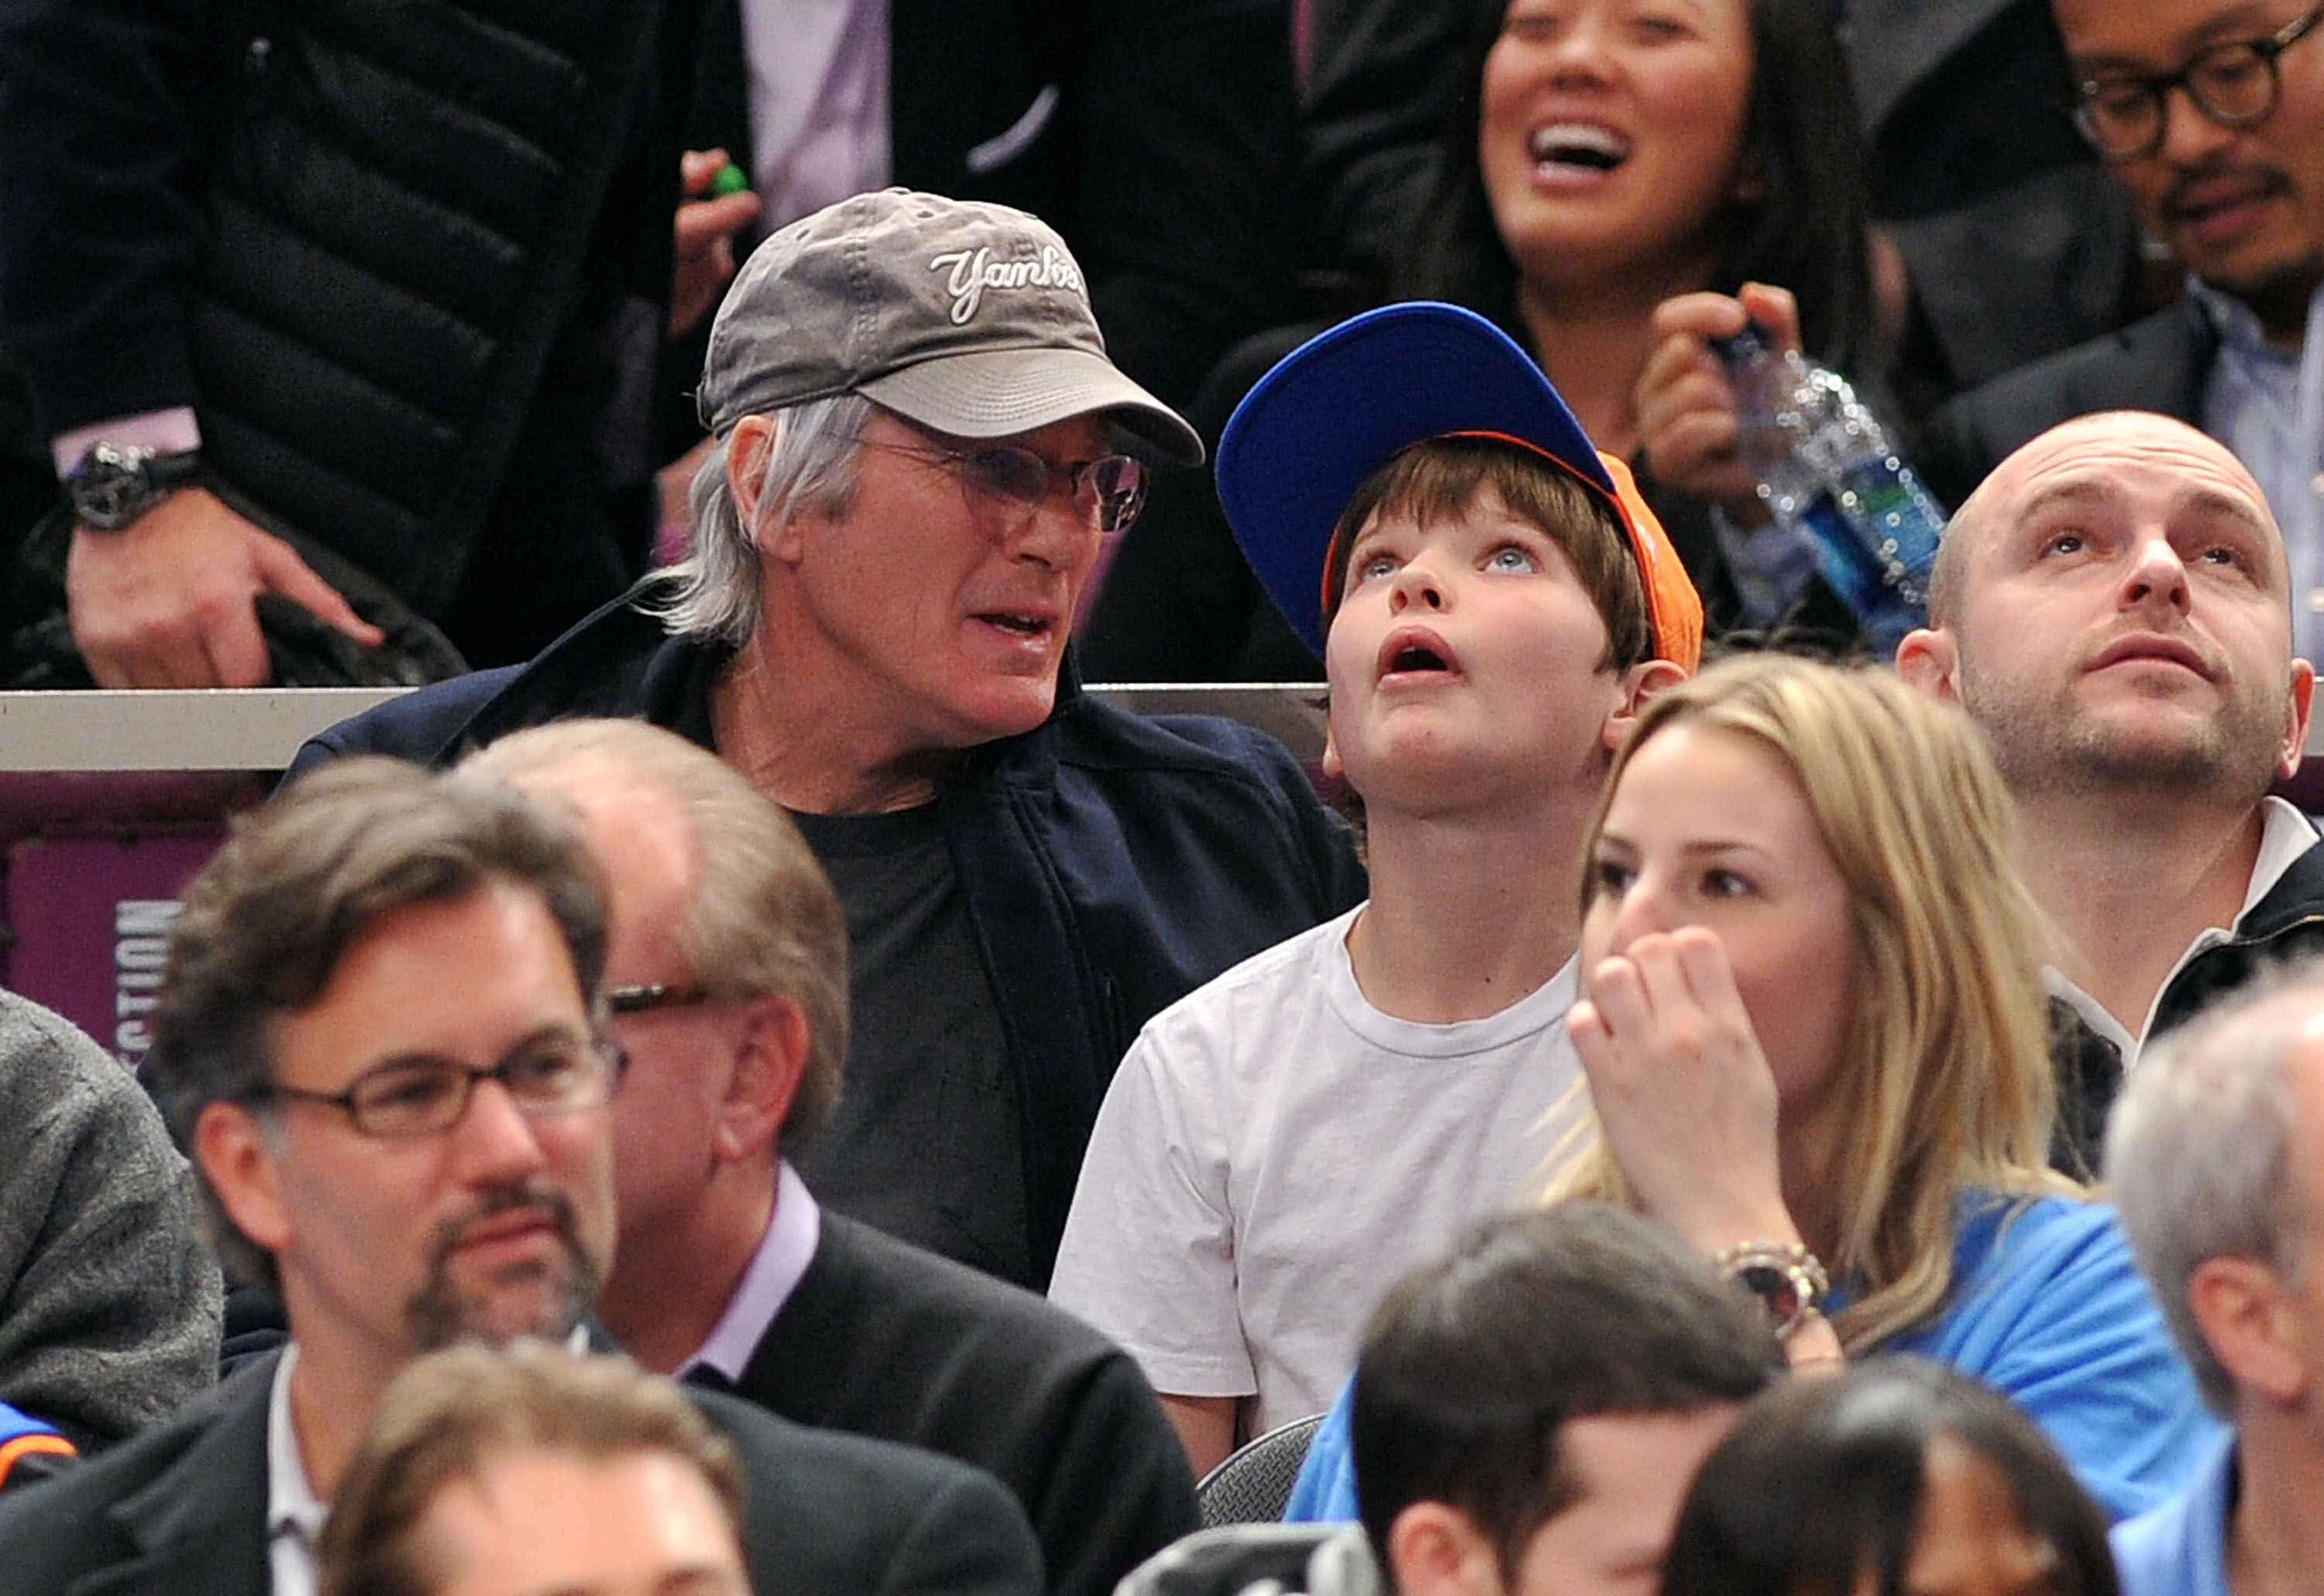 Richard Gere and Homer James Jigme Gere at a Utah Jazz vs New York Knicks game in New York City on March 7, 2011 | Source: Getty Images